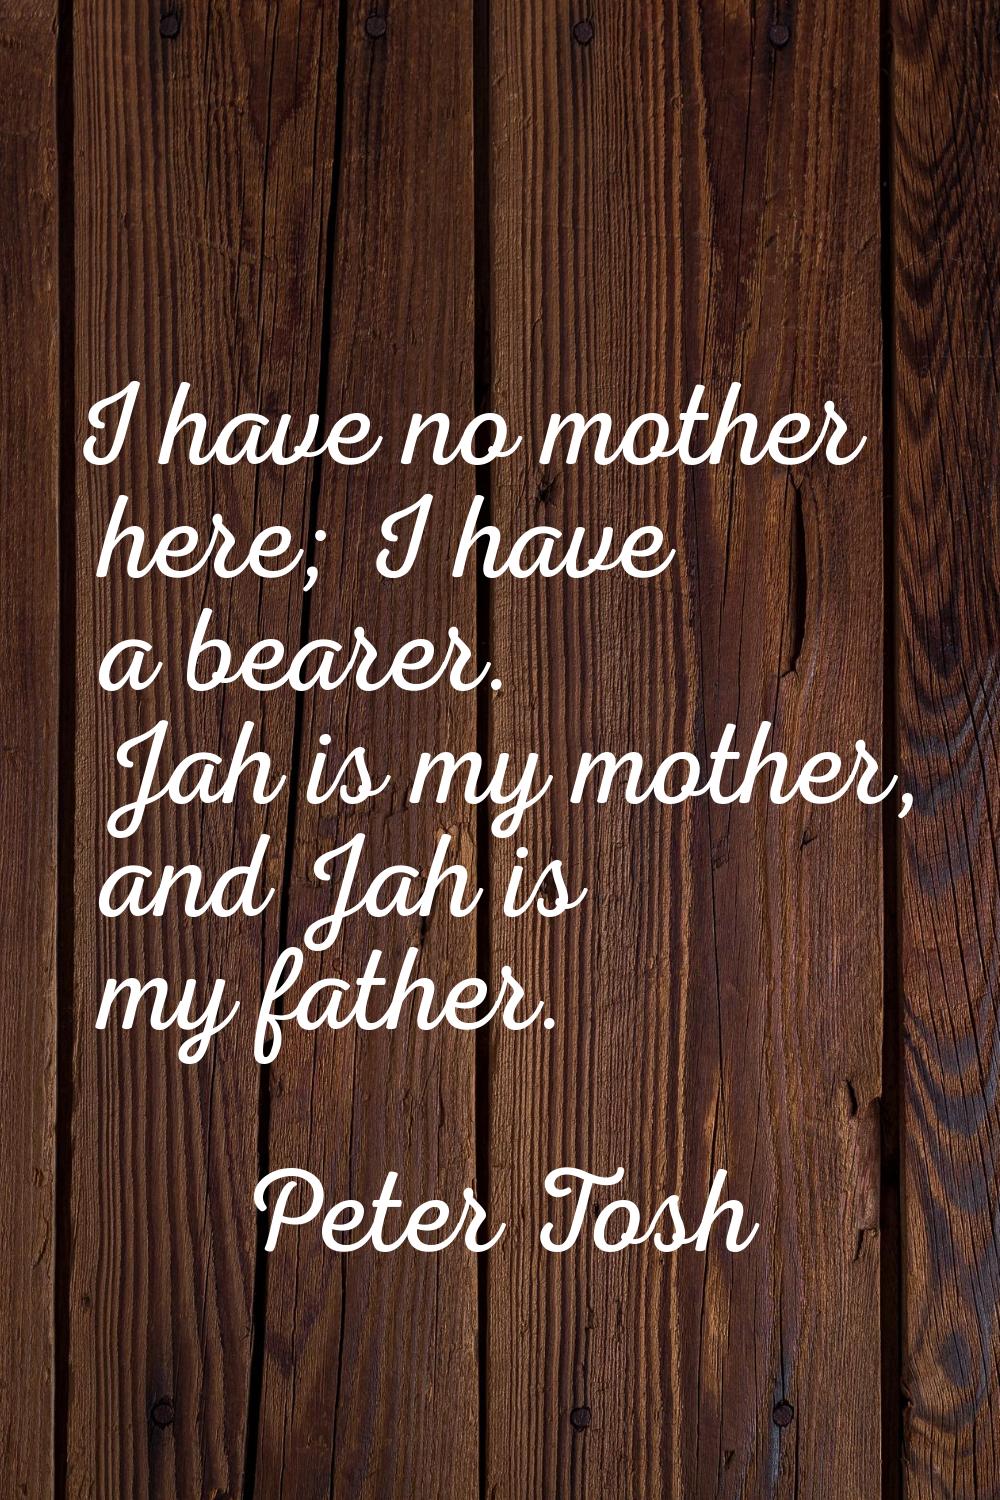 I have no mother here; I have a bearer. Jah is my mother, and Jah is my father.